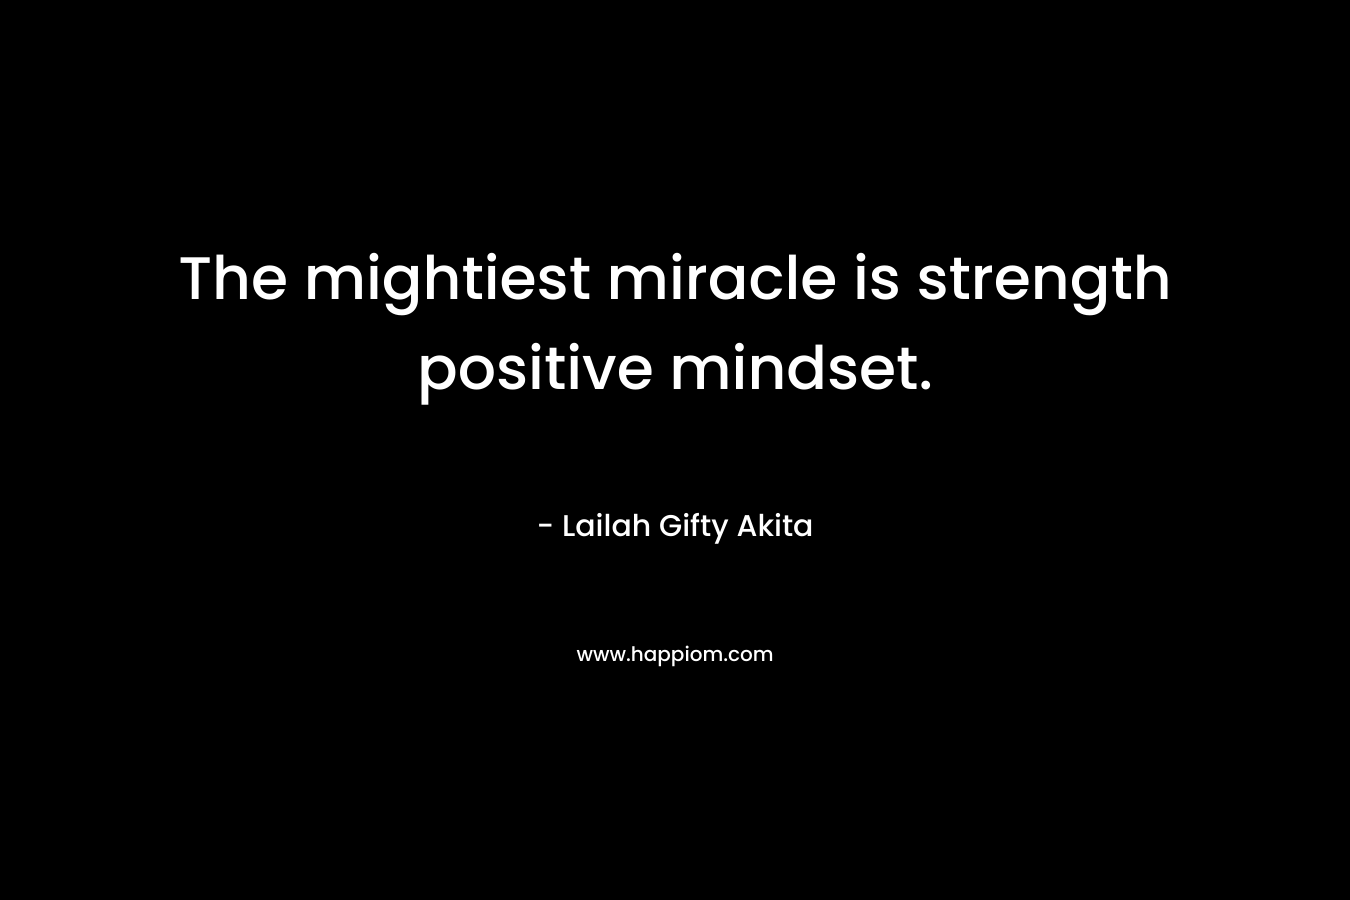 The mightiest miracle is strength positive mindset.